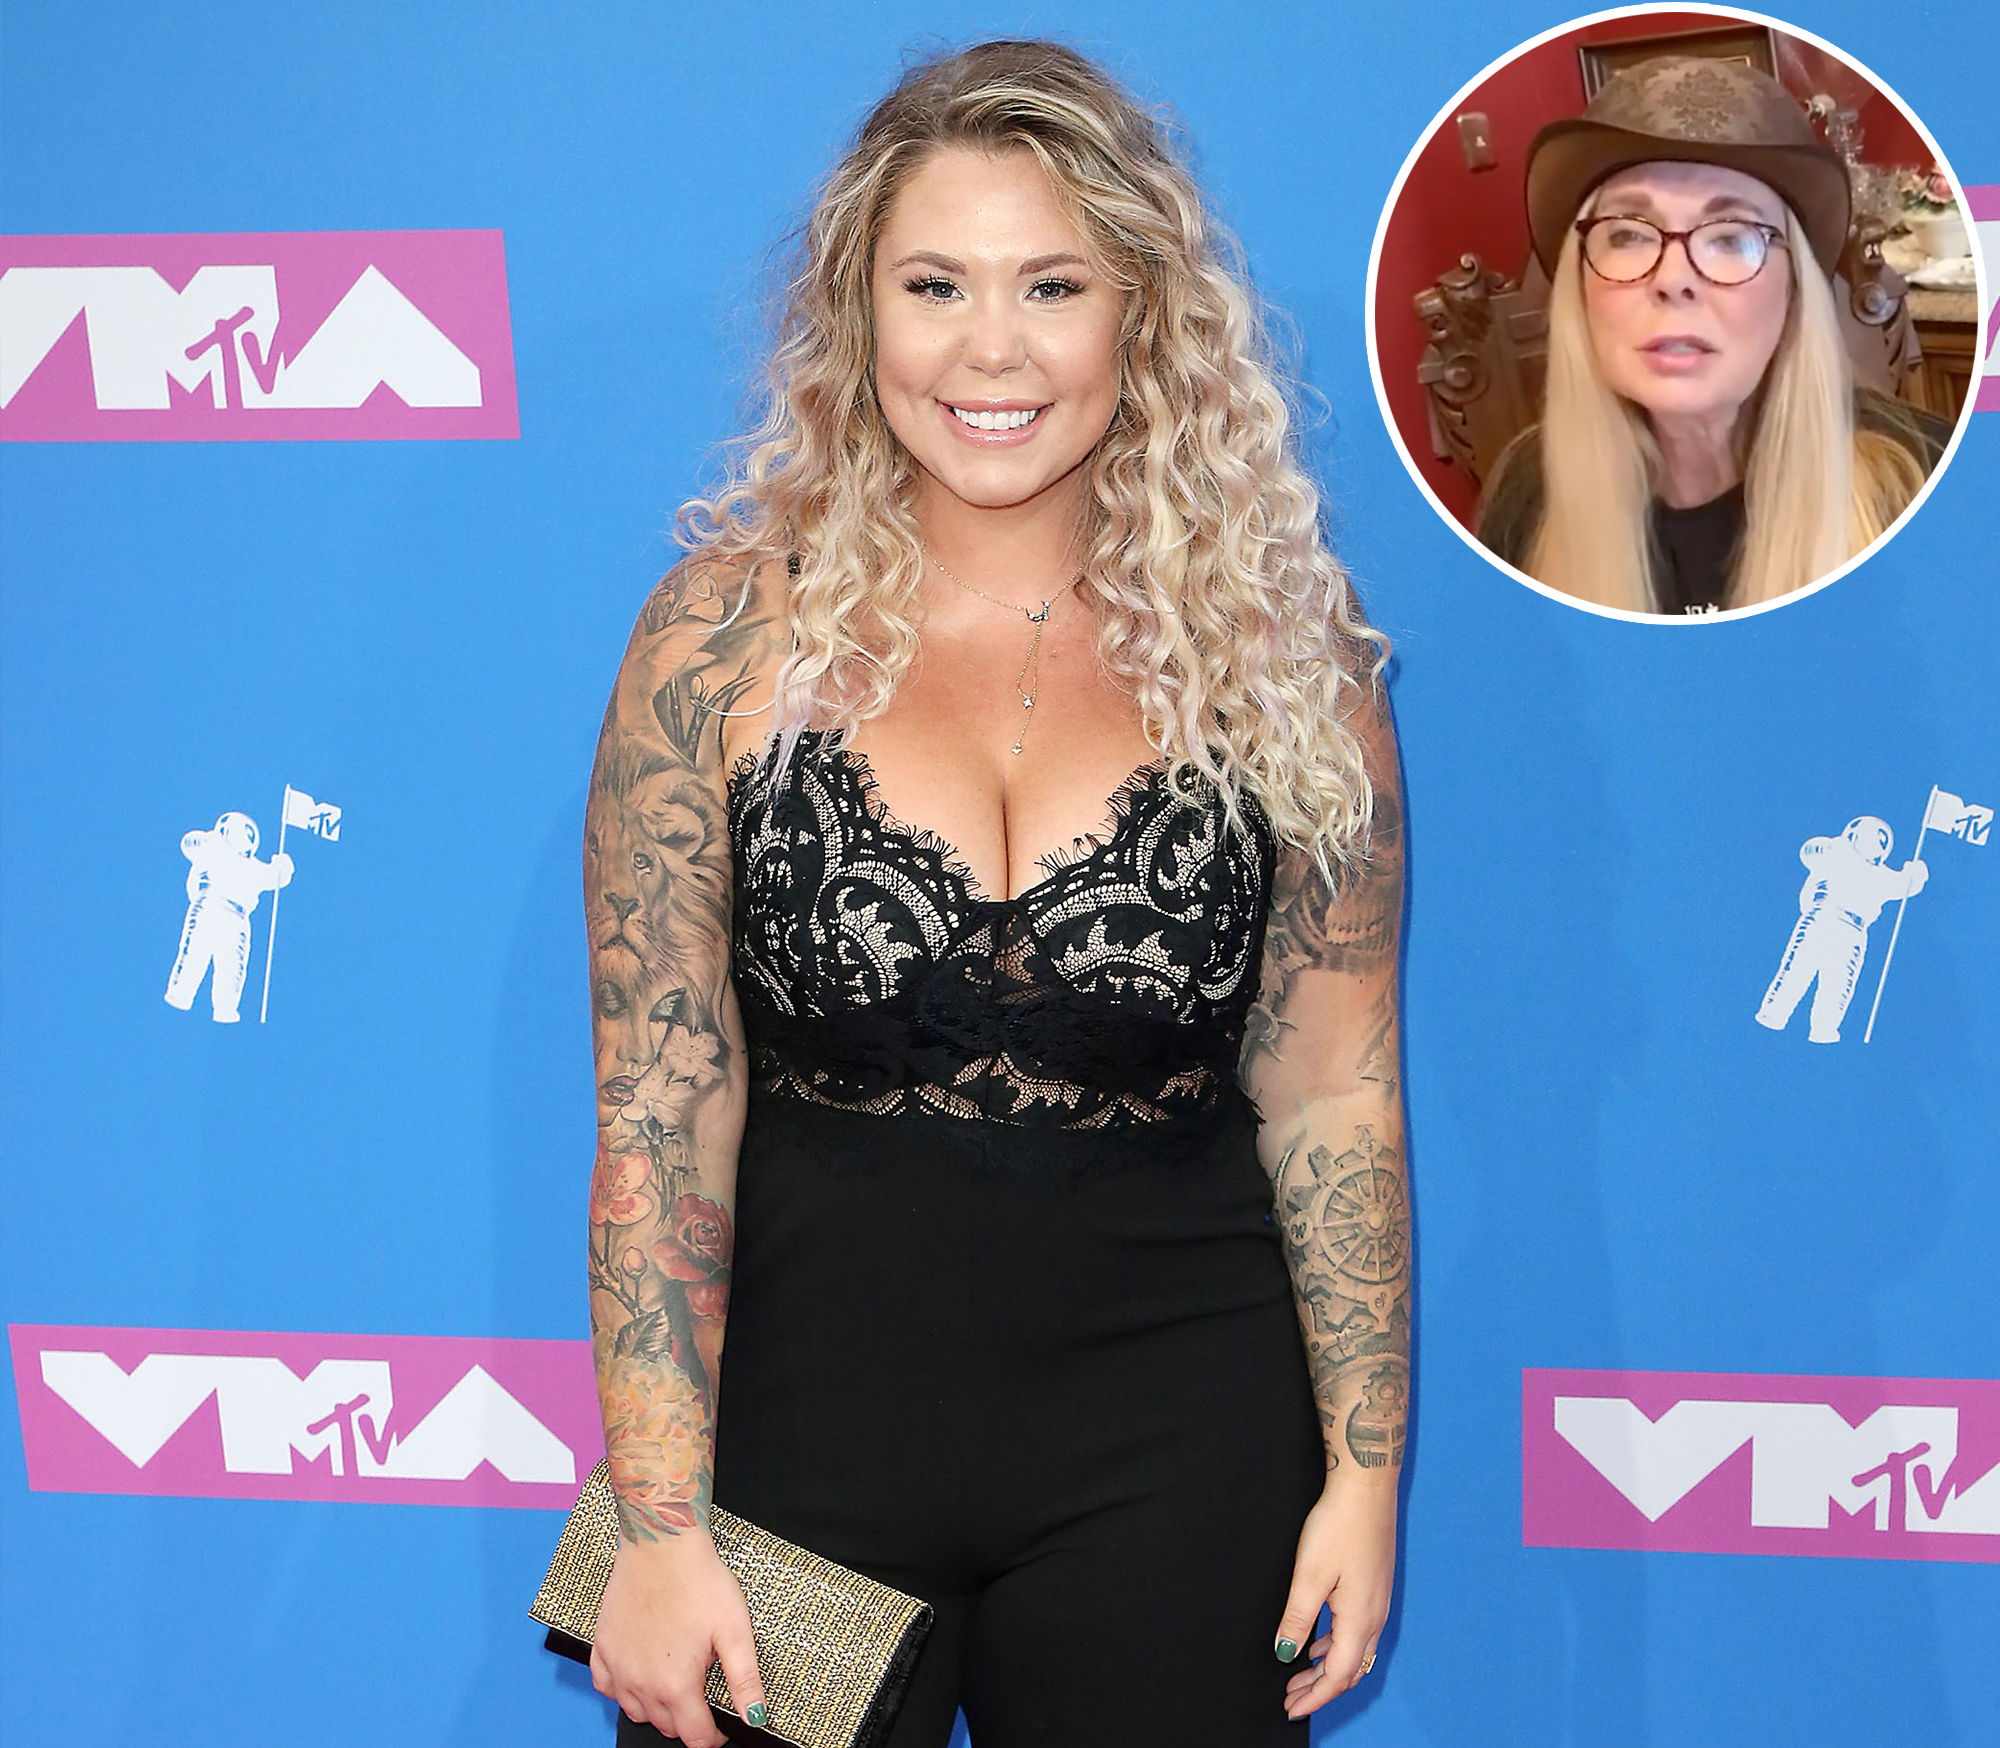 Onlyfans kail lowry Kailyn Lowry